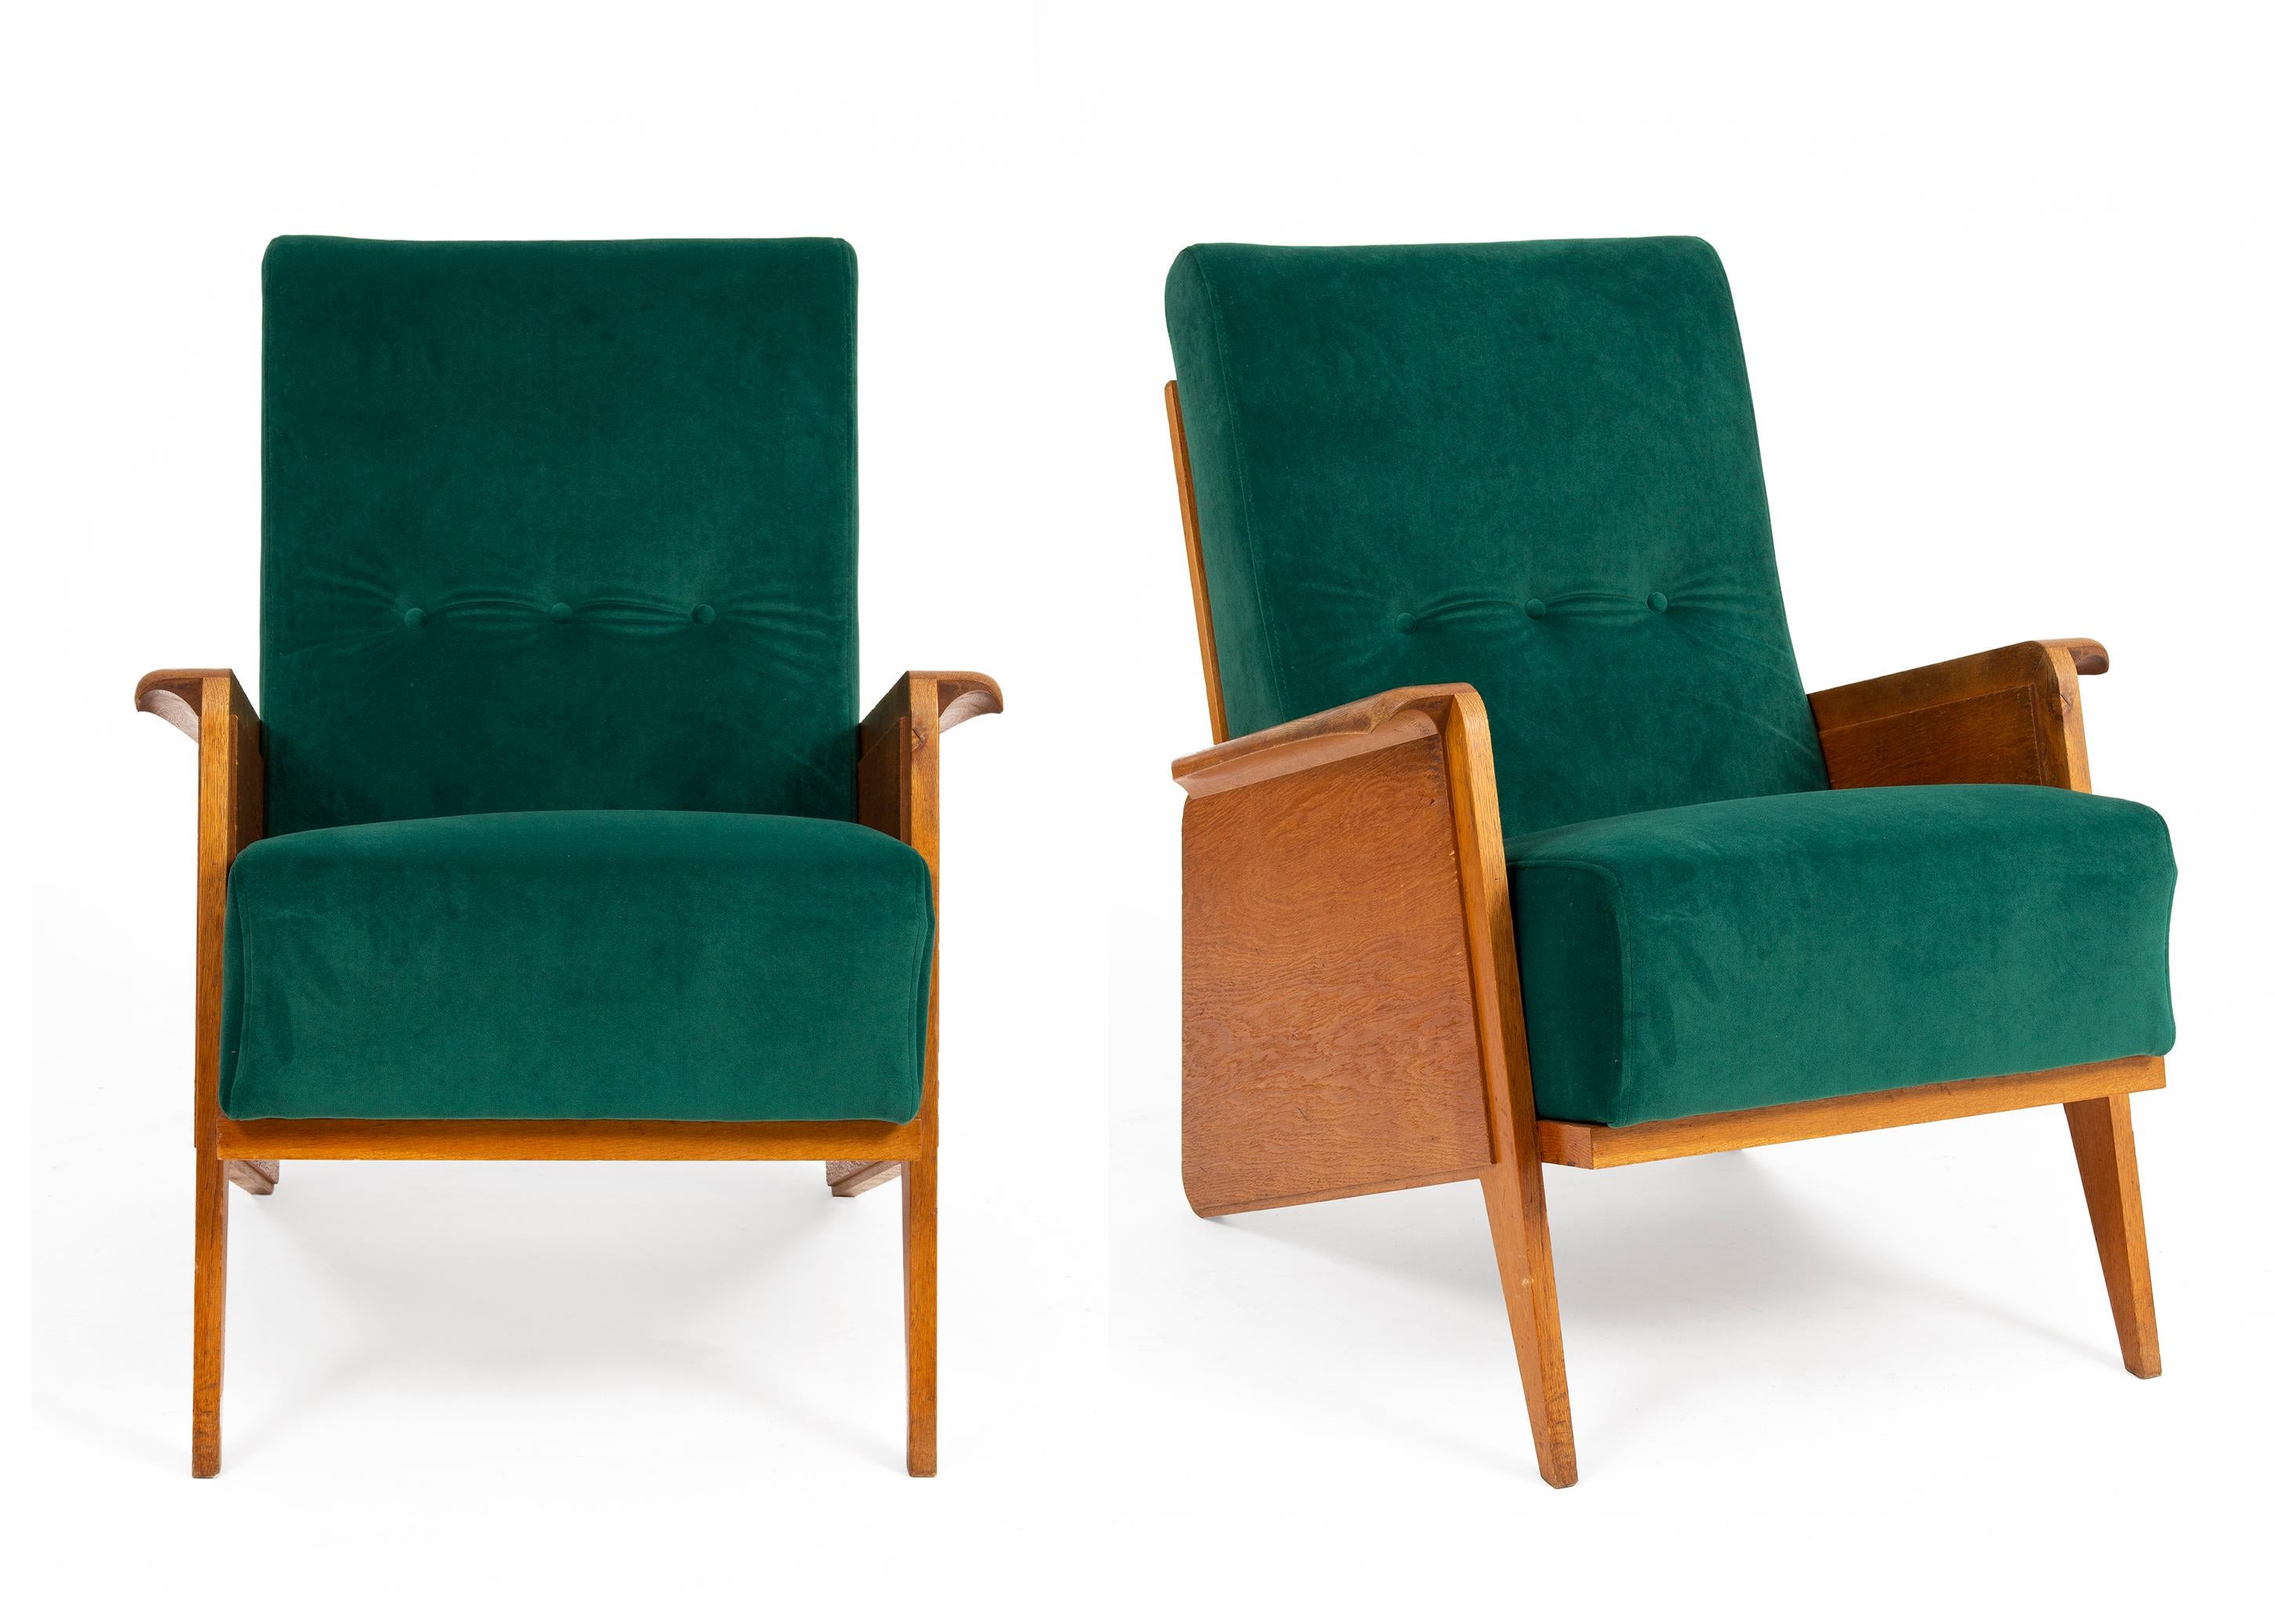 Modern Armchairs in Pair, ca. 1930s '2 Pieces'